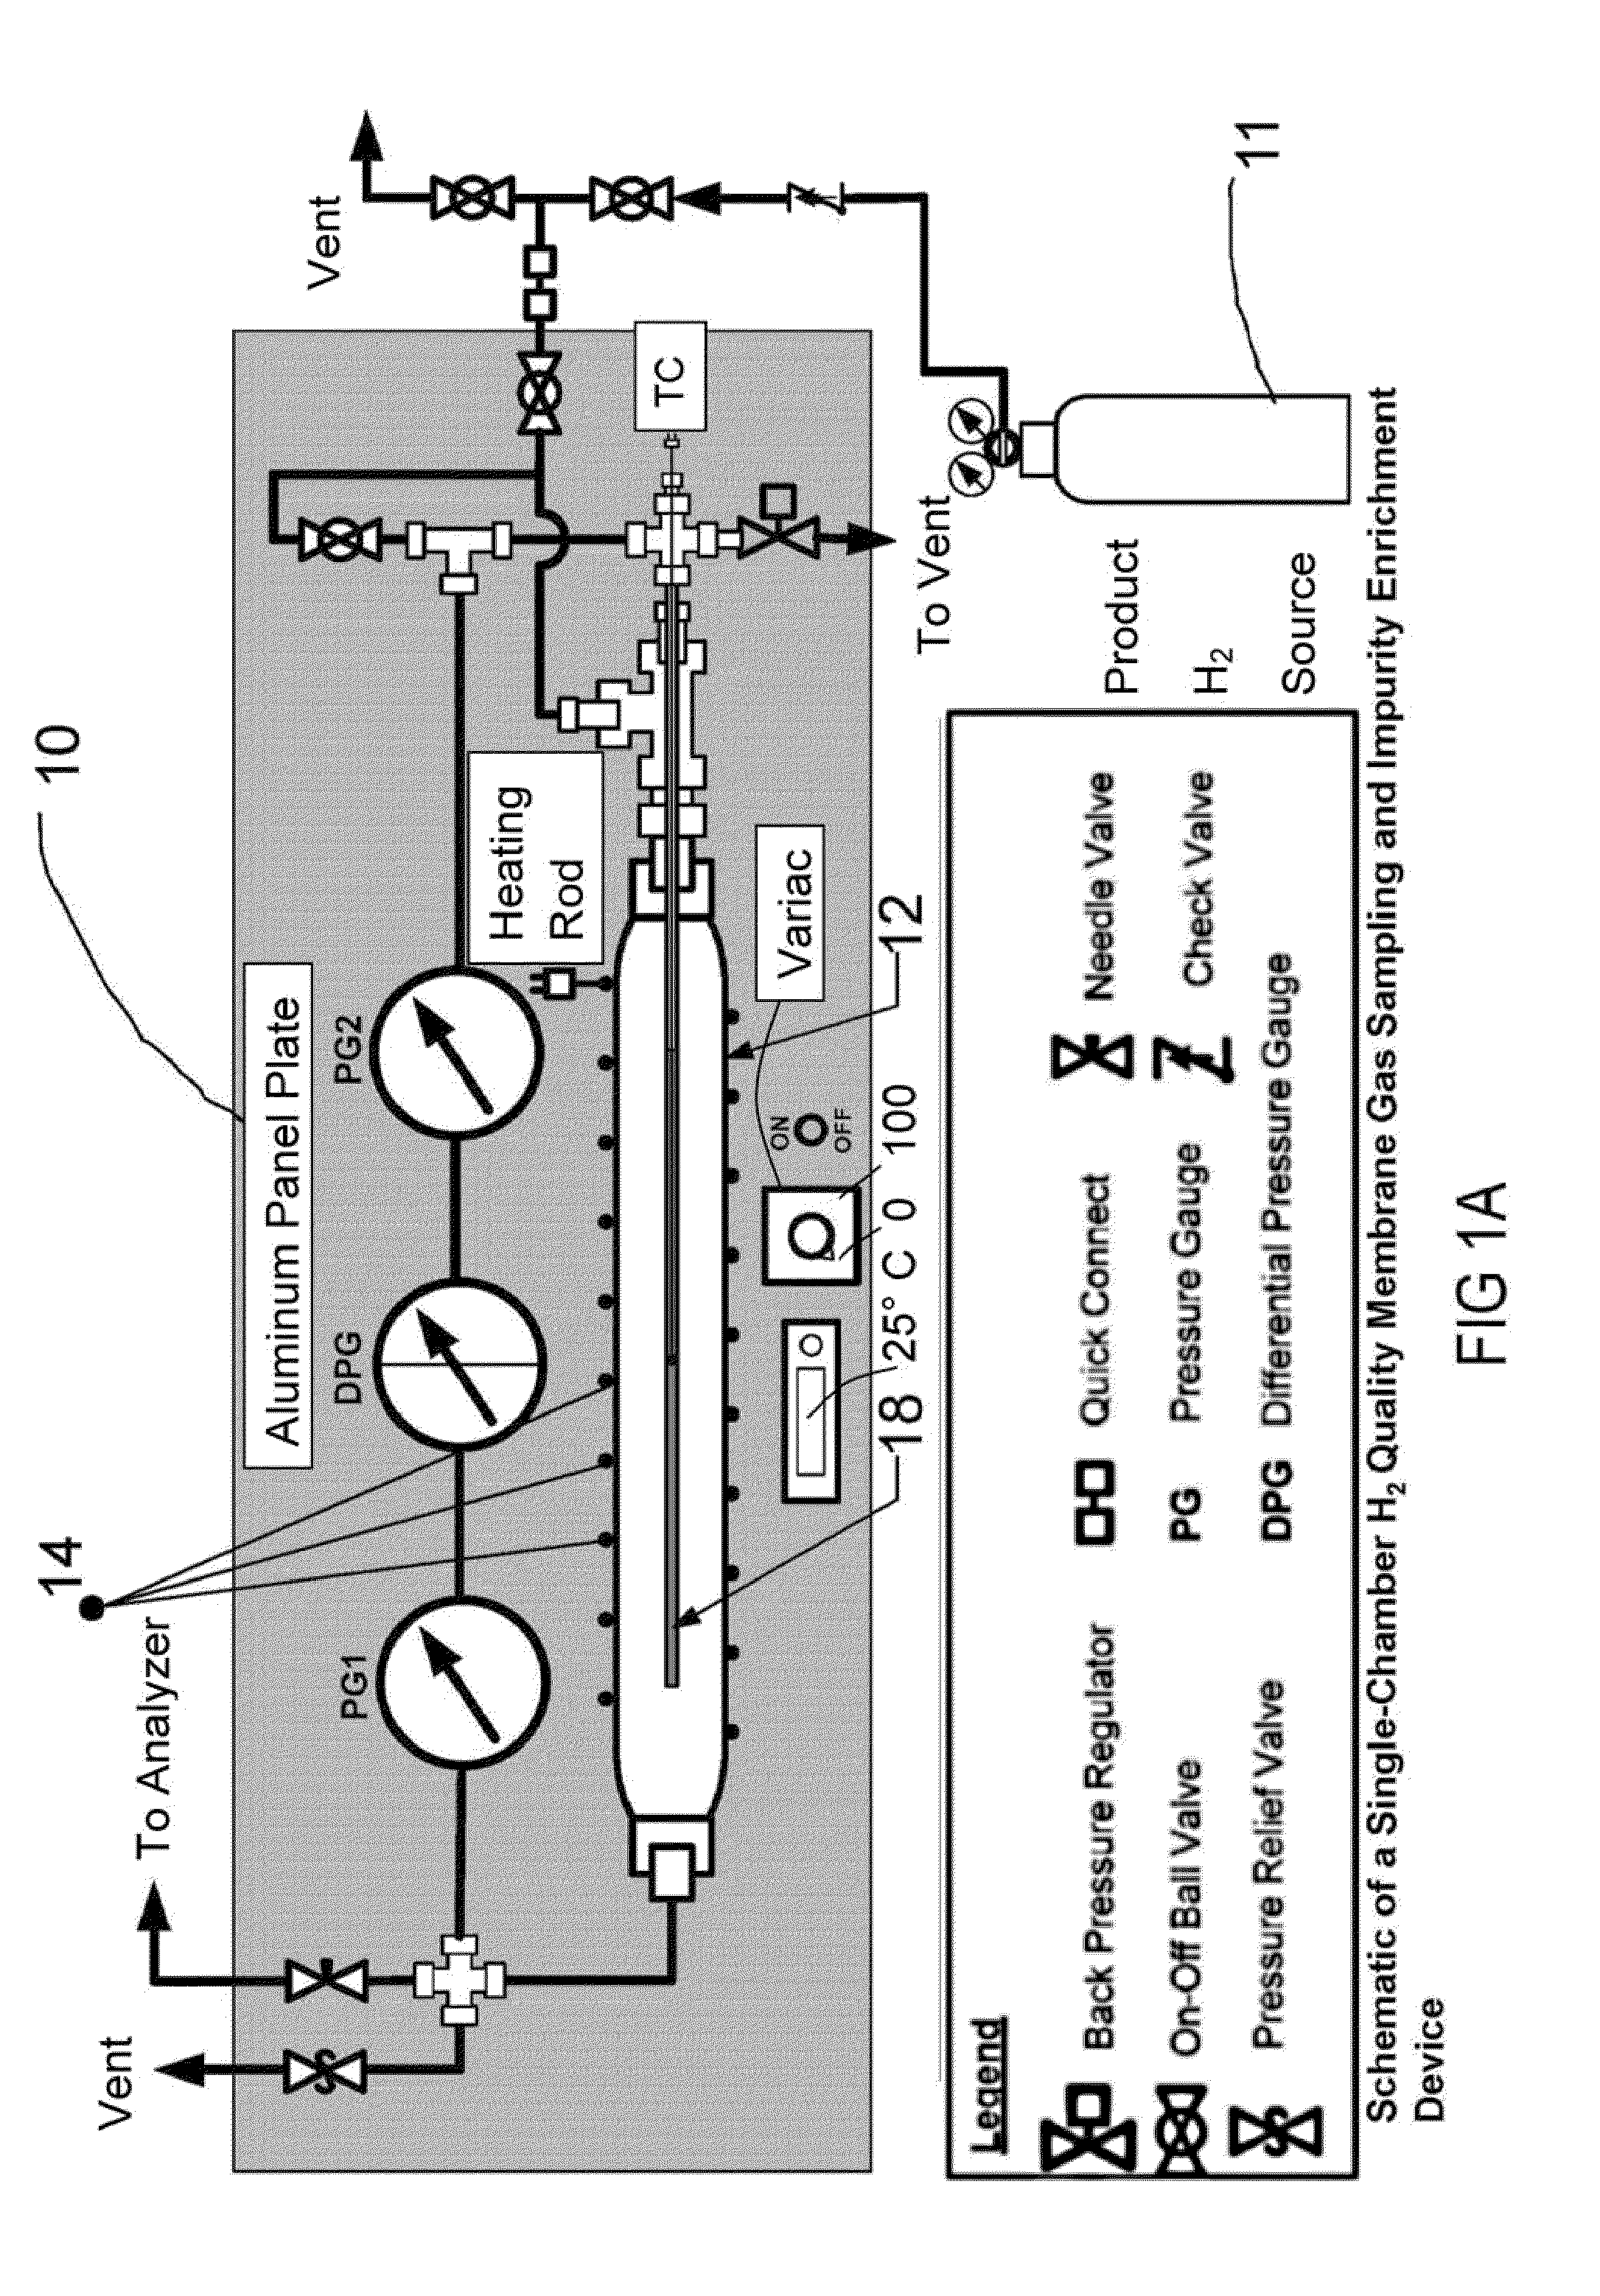 Device and method to sample and enrich impurities in hydrogen